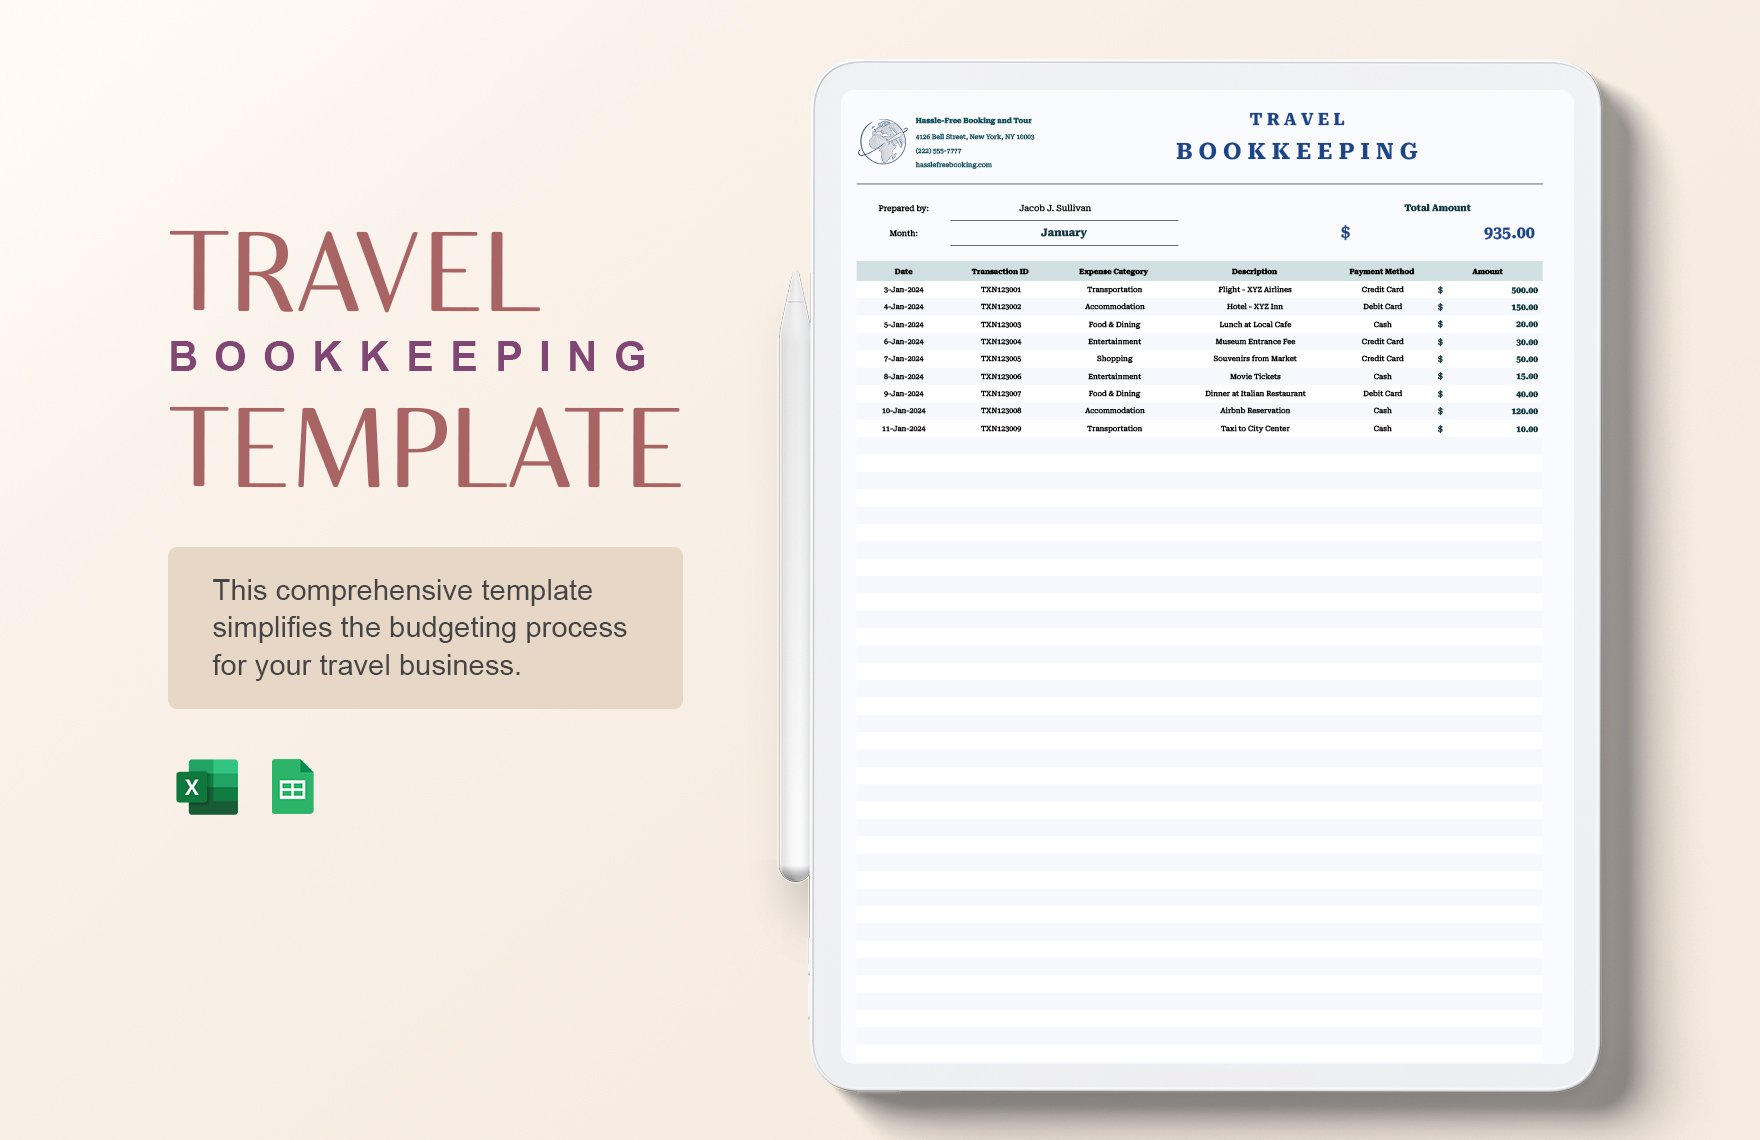 Travel Bookkeeping Template